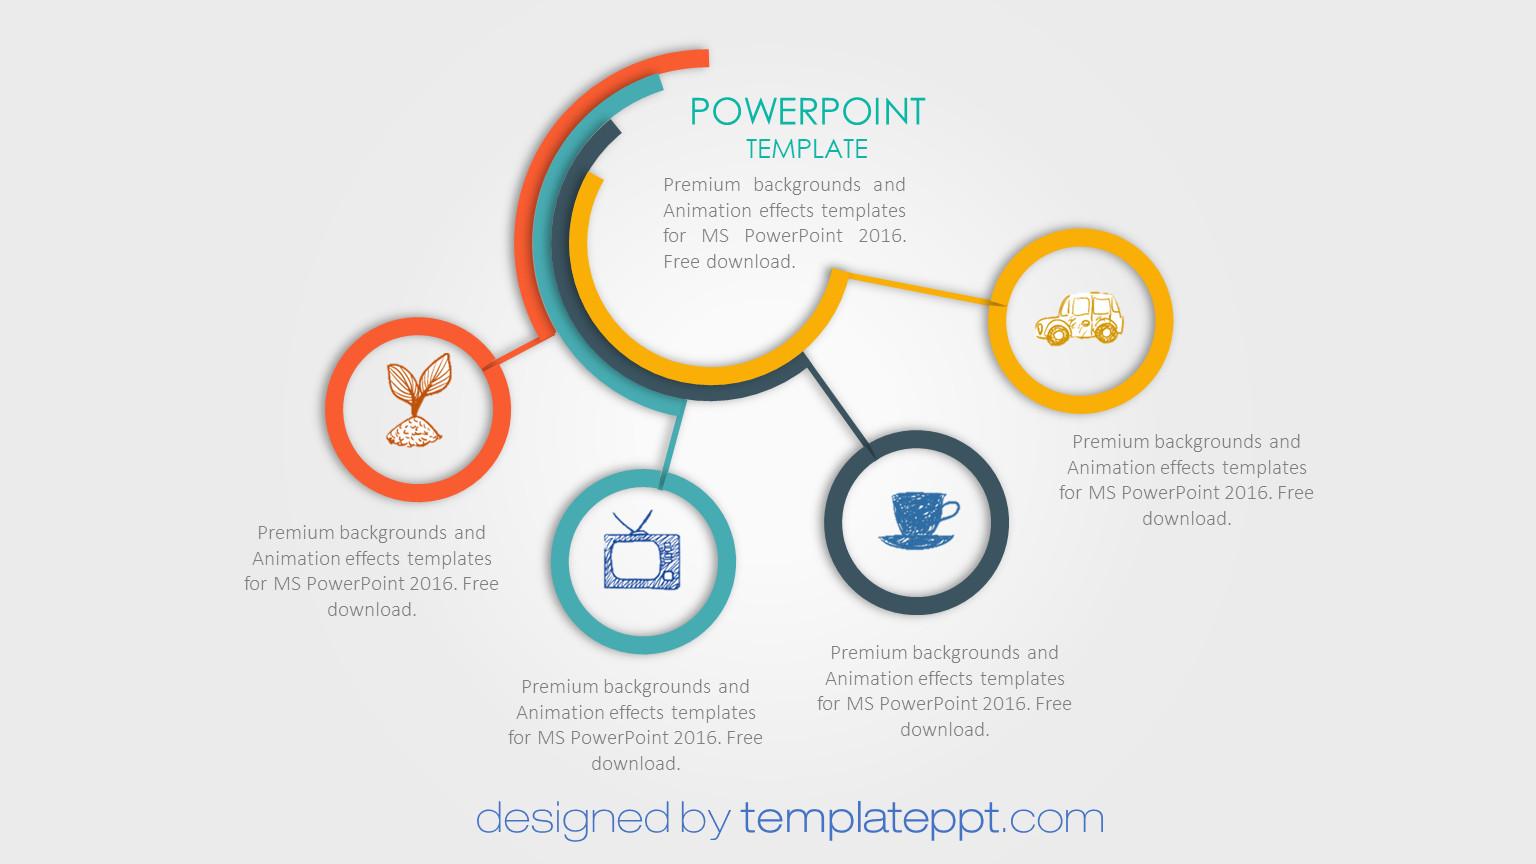 Professional PowerPoint templates free 2016